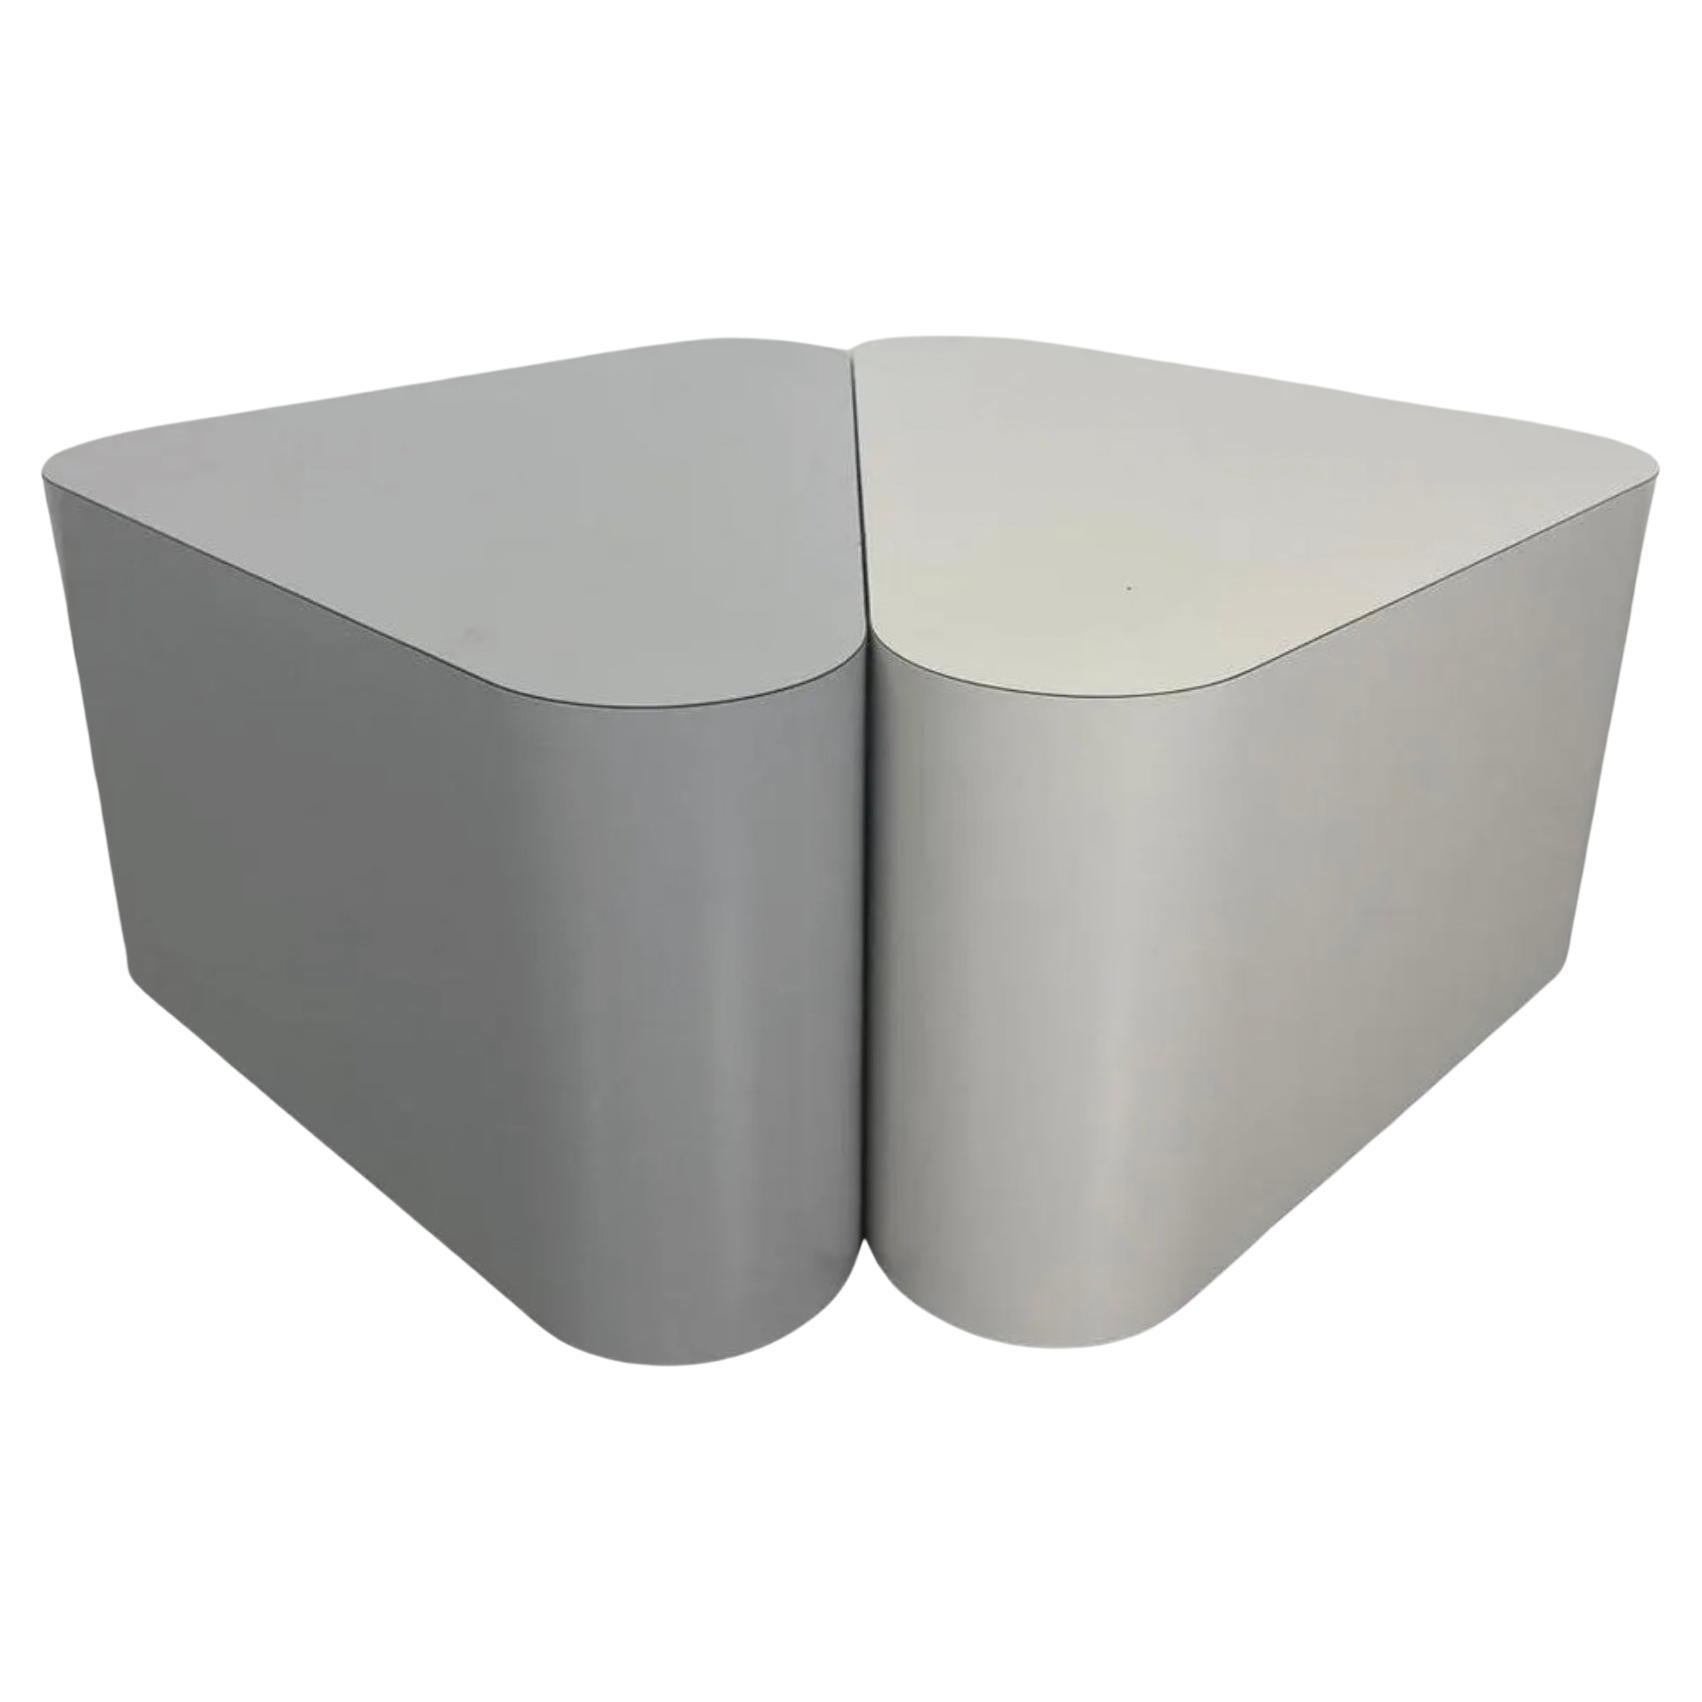 Pair of Post Modern Gray Laminate rounded triangle end tables on casters